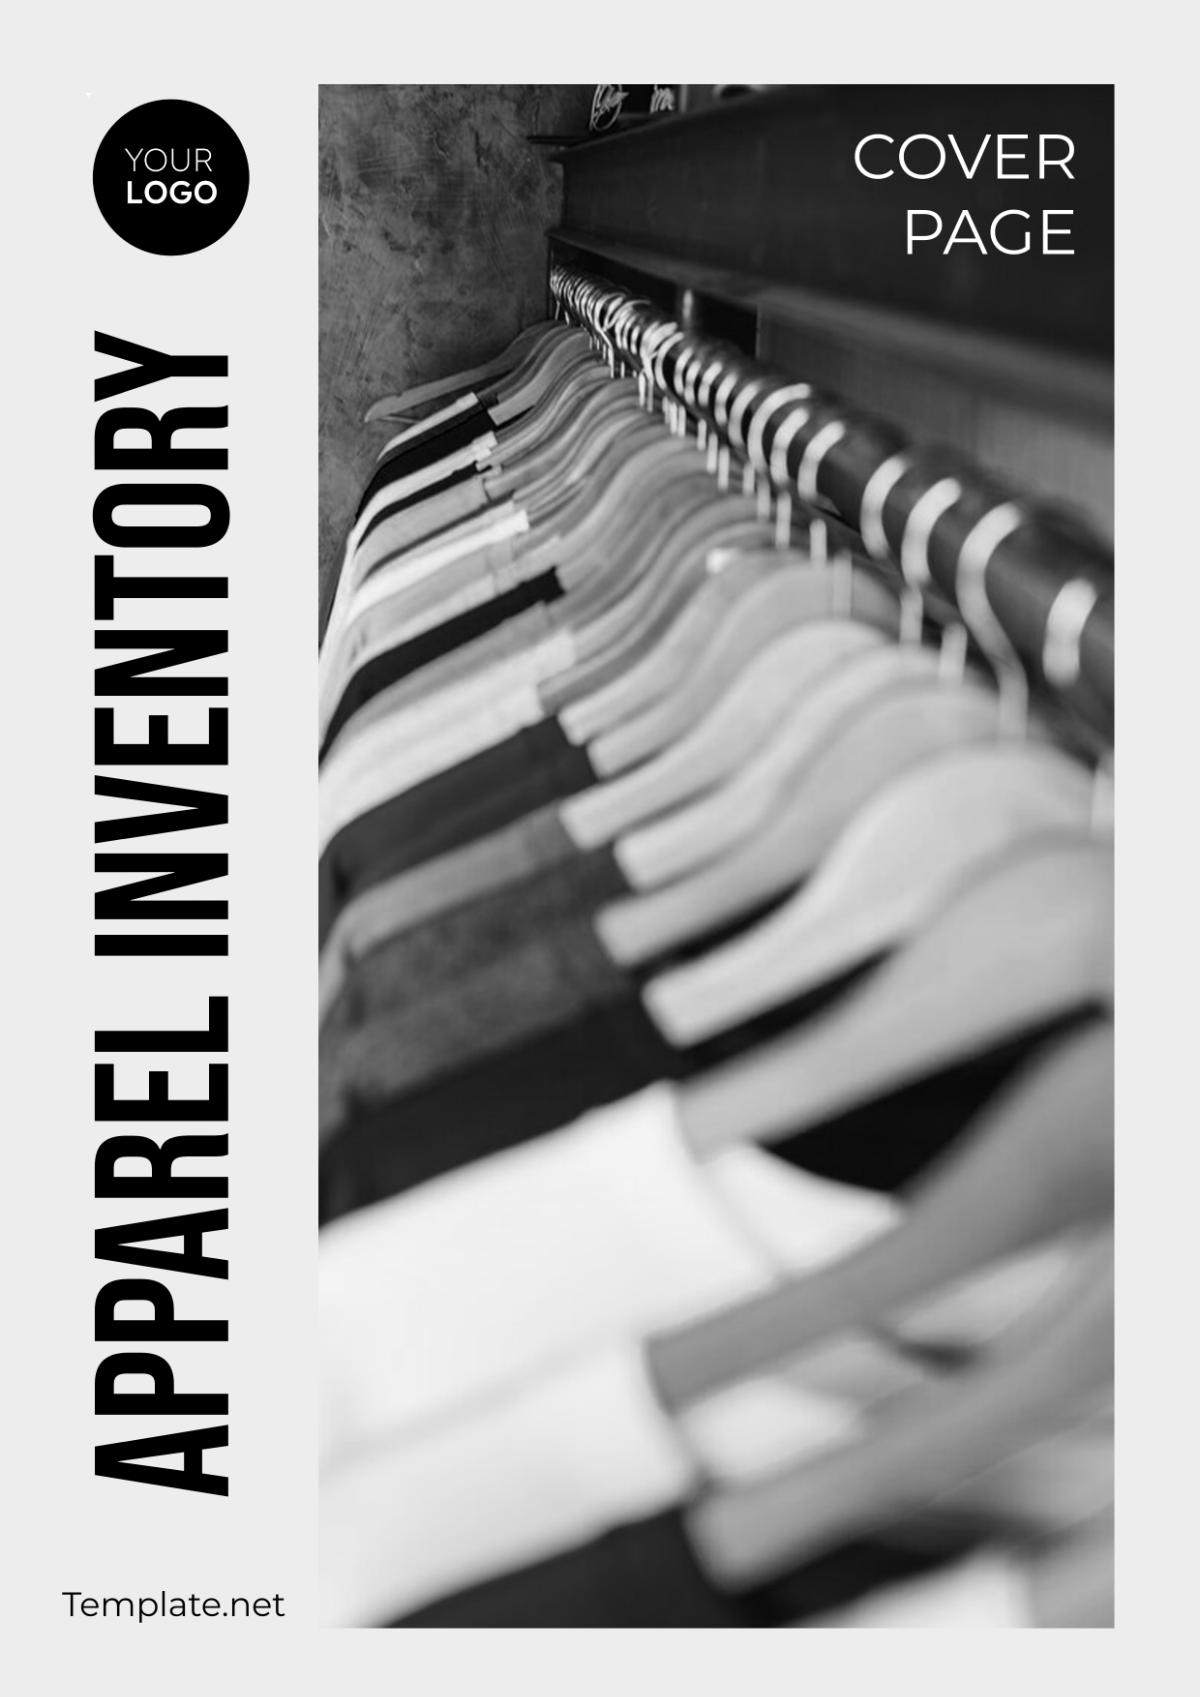 Apparel Inventory Cover Page